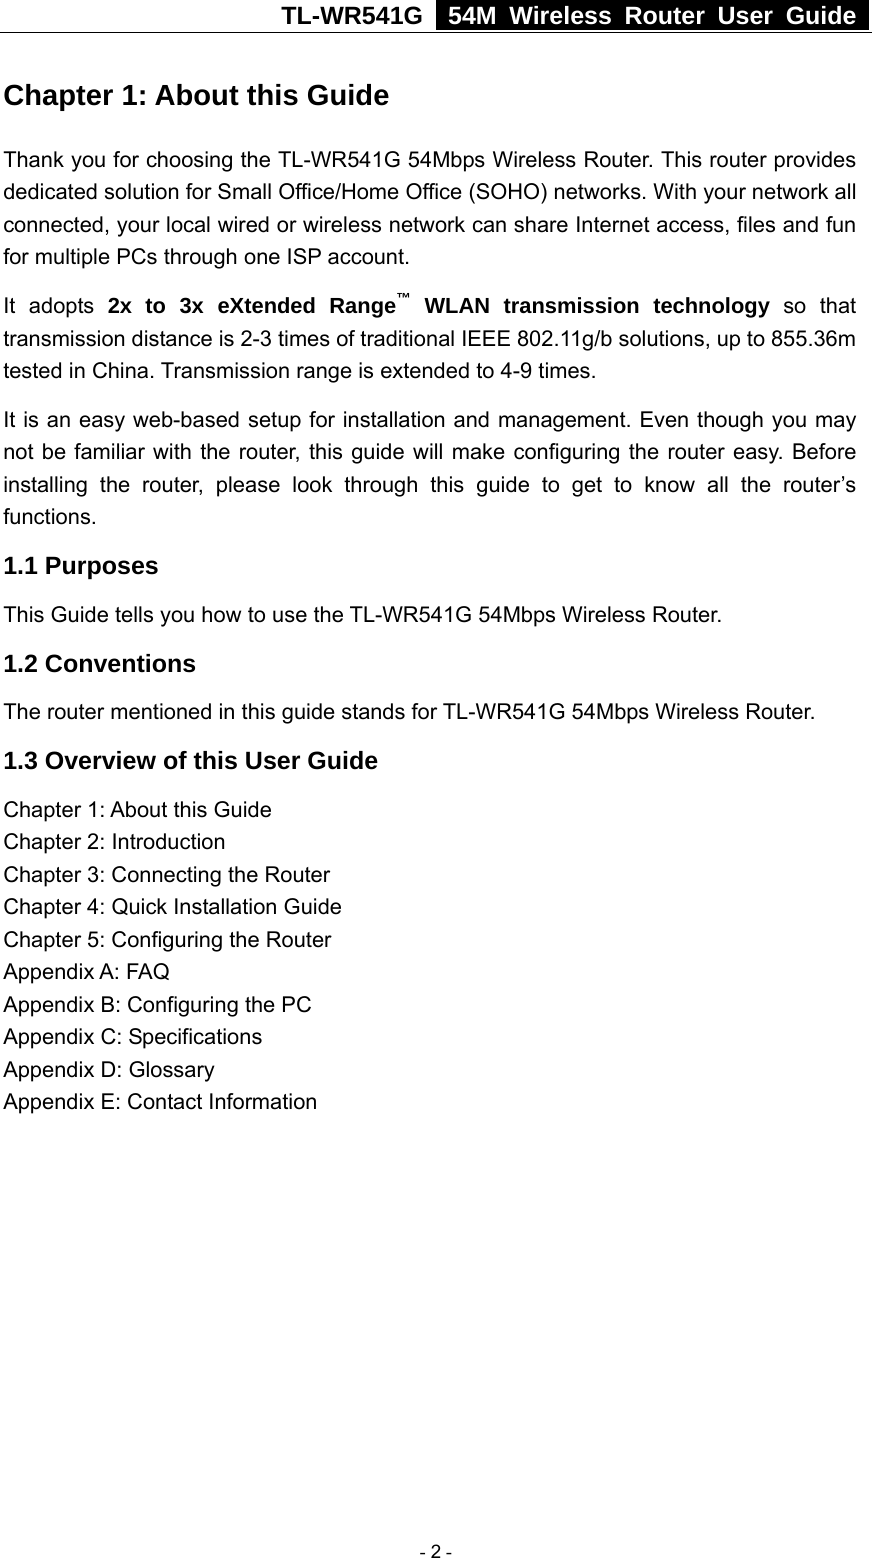 TL-WR541G   54M Wireless Router User Guide  Chapter 1: About this Guide Thank you for choosing the TL-WR541G 54Mbps Wireless Router. This router provides dedicated solution for Small Office/Home Office (SOHO) networks. With your network all connected, your local wired or wireless network can share Internet access, files and fun for multiple PCs through one ISP account.     It adopts 2x to 3x eXtended Range™ WLAN transmission technology so that transmission distance is 2-3 times of traditional IEEE 802.11g/b solutions, up to 855.36m tested in China. Transmission range is extended to 4-9 times. It is an easy web-based setup for installation and management. Even though you may not be familiar with the router, this guide will make configuring the router easy. Before installing the router, please look through this guide to get to know all the router’s functions. 1.1 Purposes This Guide tells you how to use the TL-WR541G 54Mbps Wireless Router.   1.2 Conventions The router mentioned in this guide stands for TL-WR541G 54Mbps Wireless Router. 1.3 Overview of this User Guide Chapter 1: About this Guide Chapter 2: Introduction Chapter 3: Connecting the Router Chapter 4: Quick Installation Guide Chapter 5: Configuring the Router Appendix A: FAQ Appendix B: Configuring the PC Appendix C: Specifications Appendix D: Glossary Appendix E: Contact Information  - 2 - 